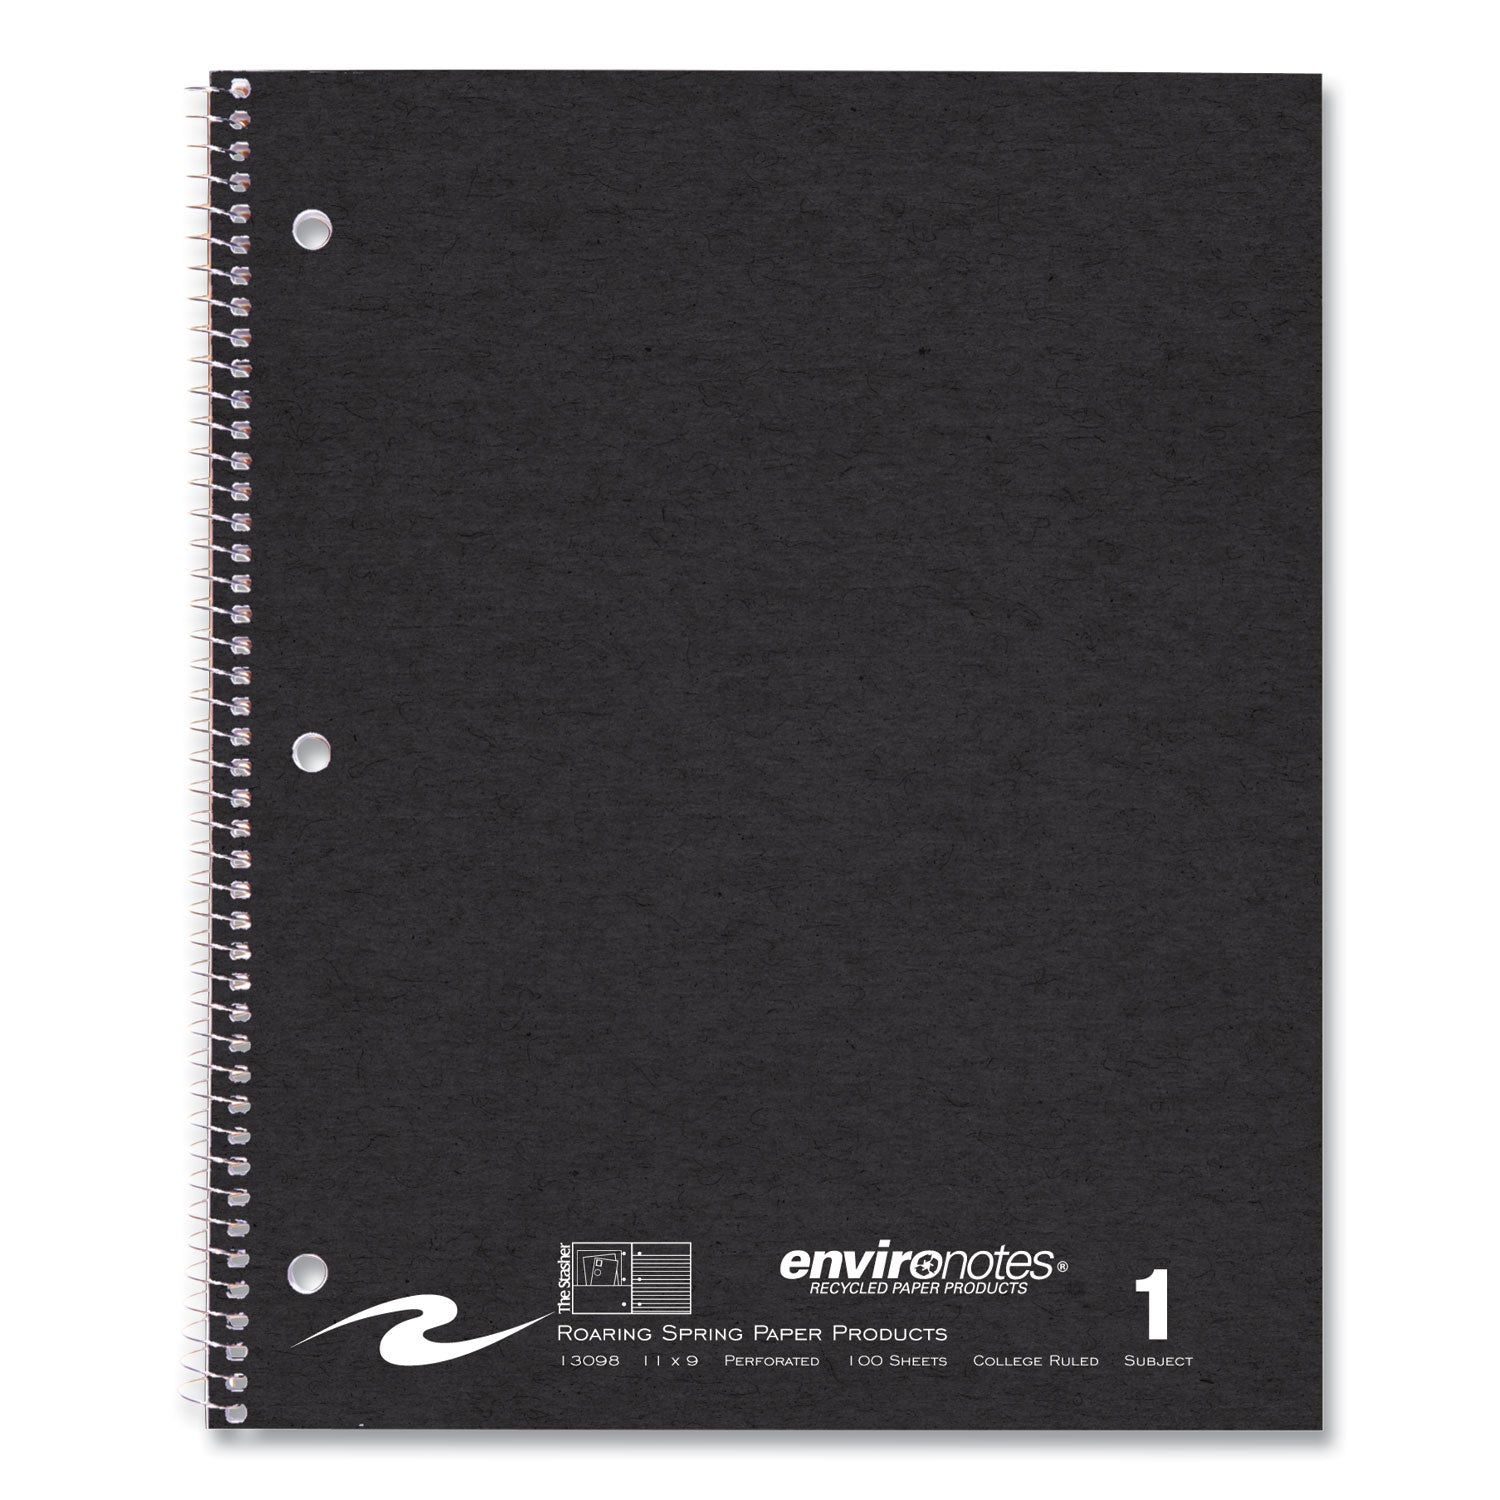 stasher-wirebound-notebooks-1-subject-med-college-rule-randomly-asst-cover-100-11x9-sheets-24-ctships-in-4-6-bus-days_roa13098cs - 2